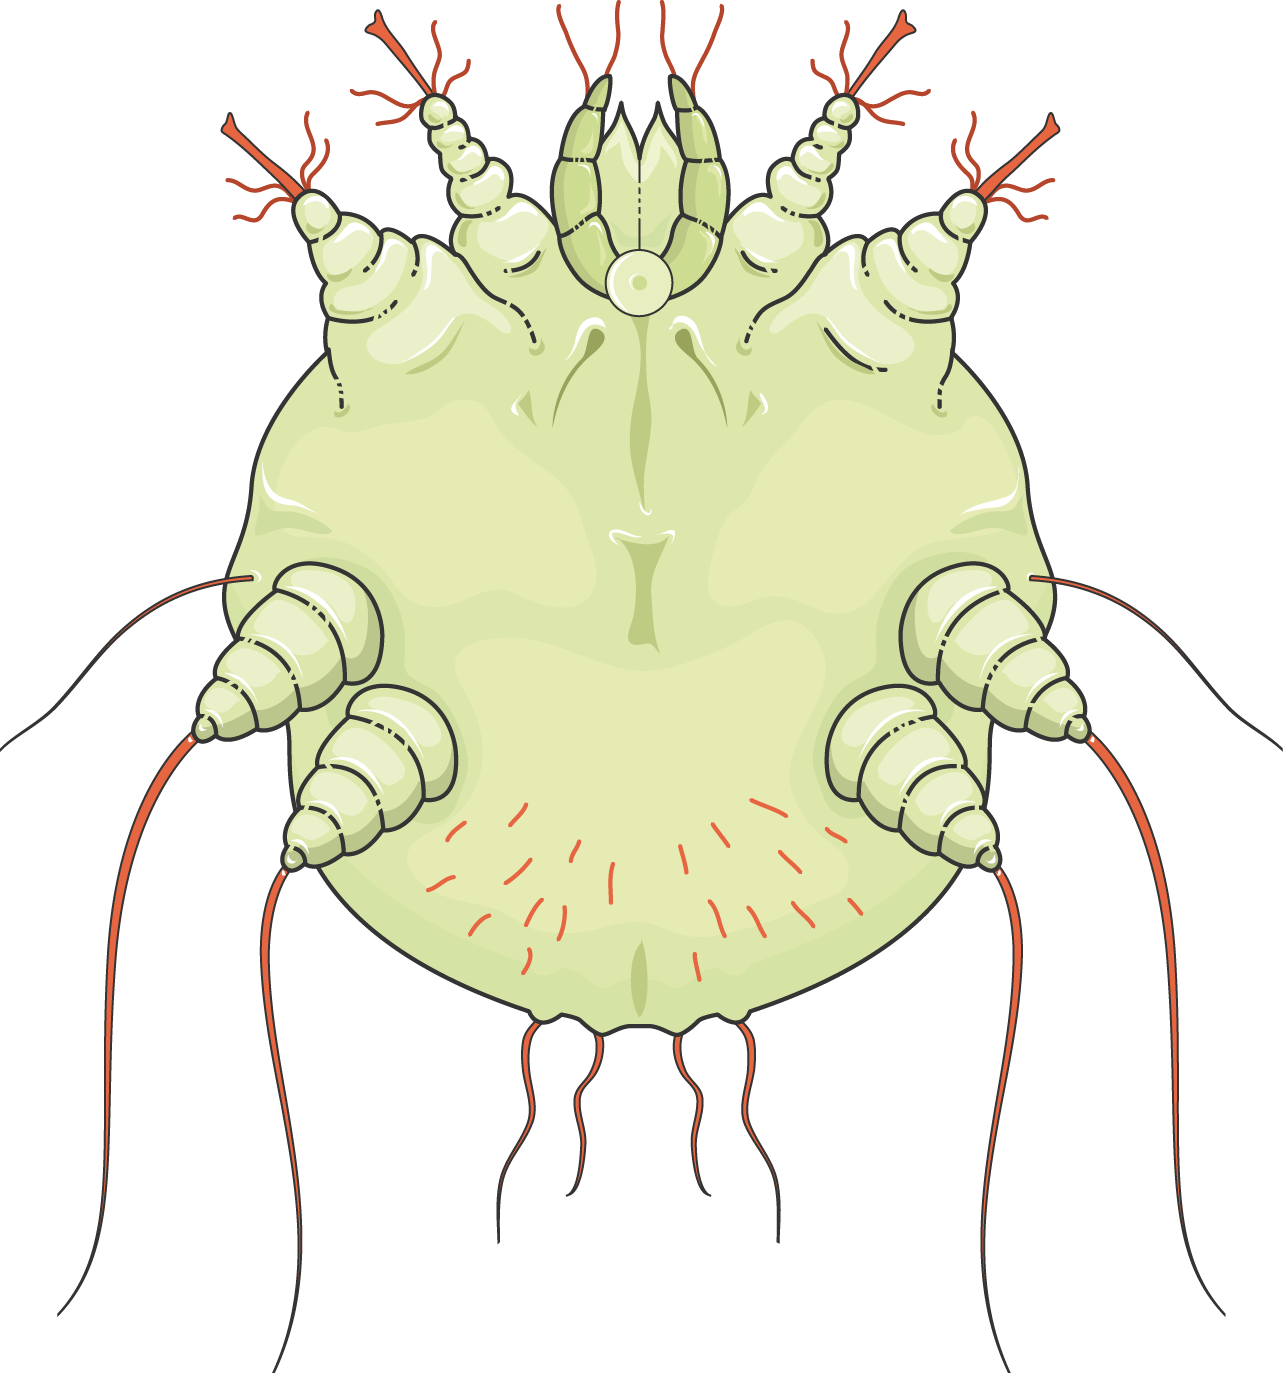 Smart images archive page. Mosquito clipart scabies